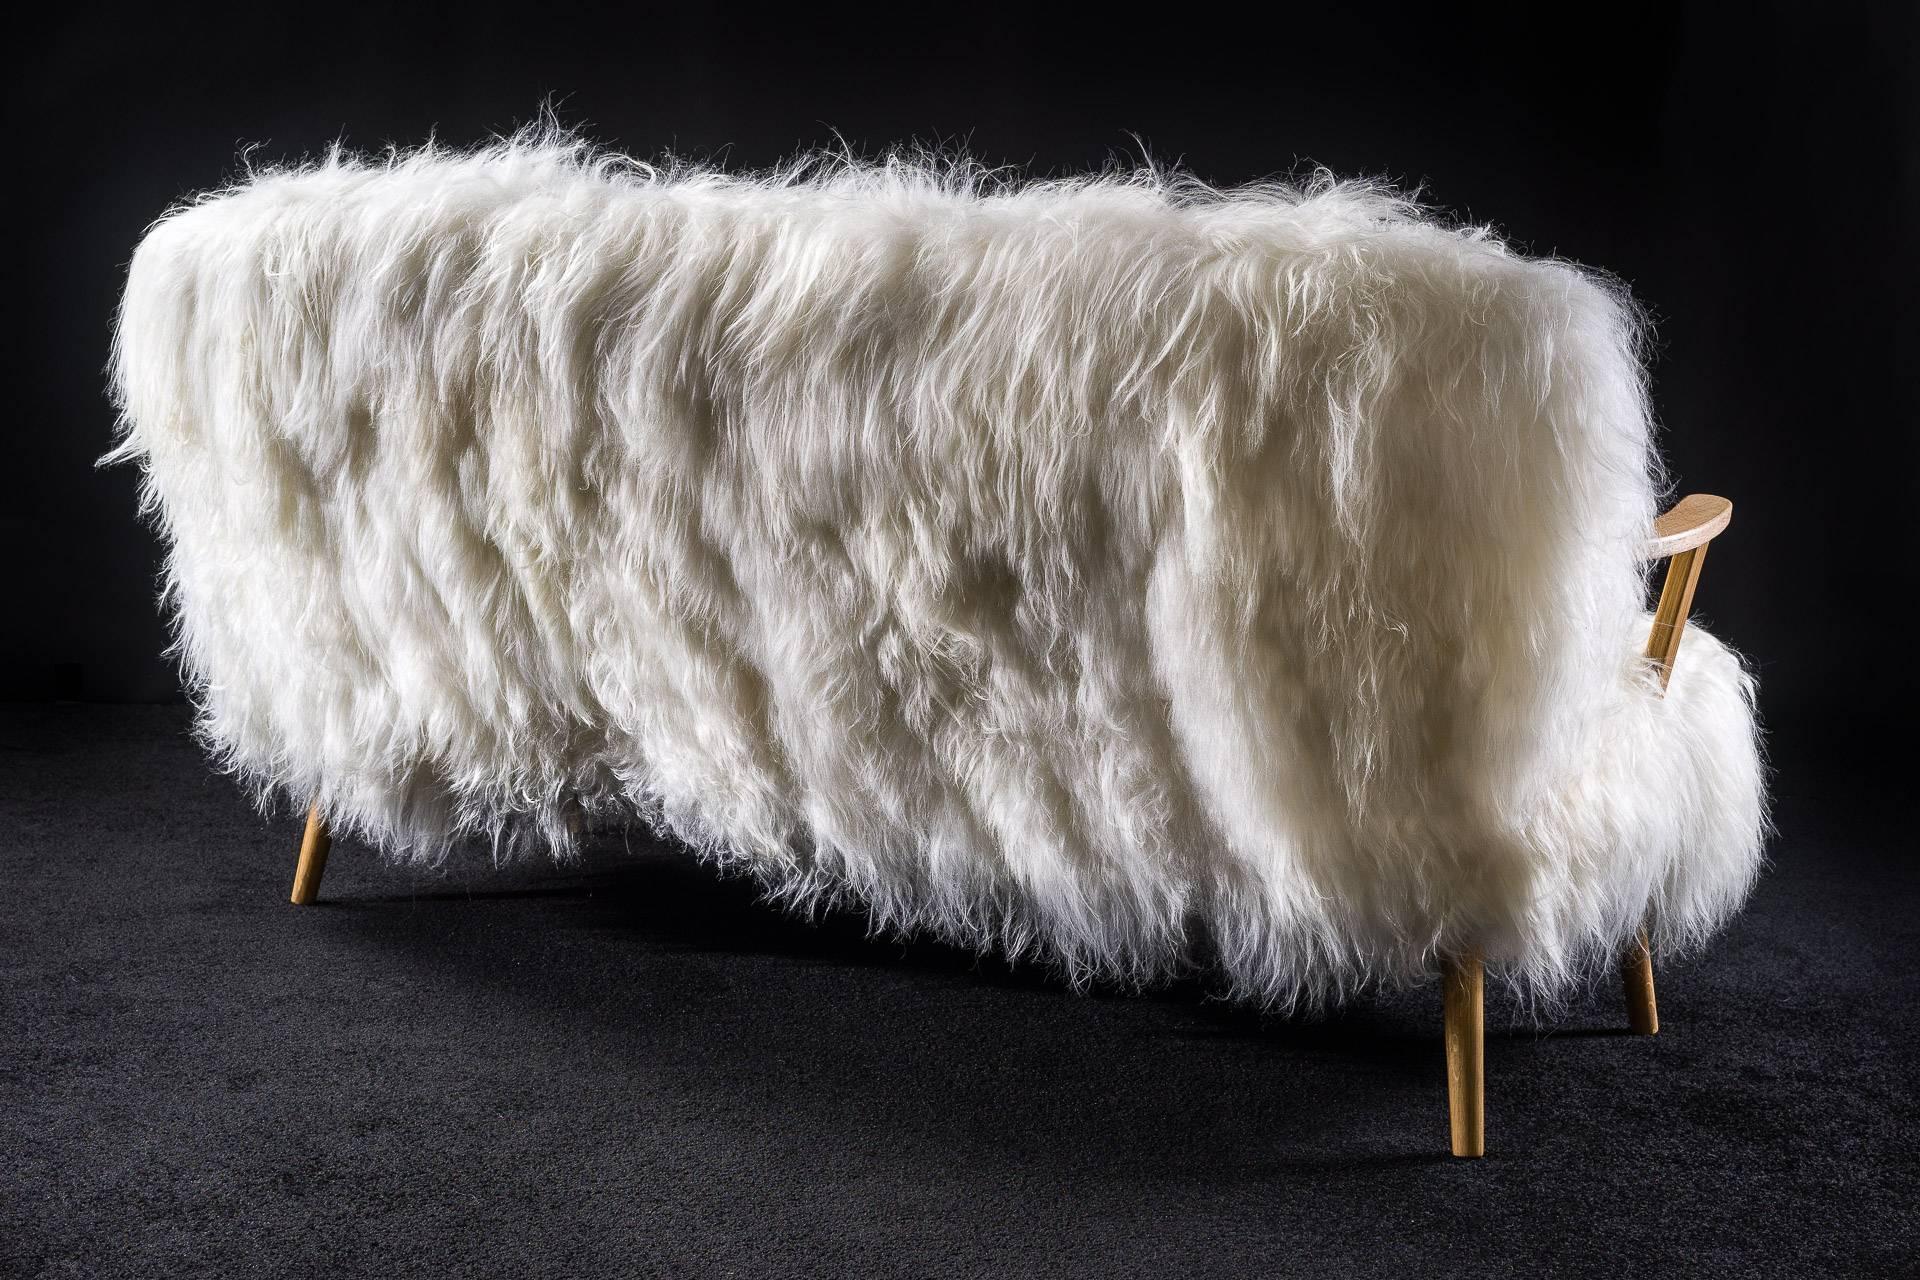 Amazing and cozy sofa with natural white Icelandic sheepskin upholstery.
Solid oak frame.
Handmade by Norki in France.